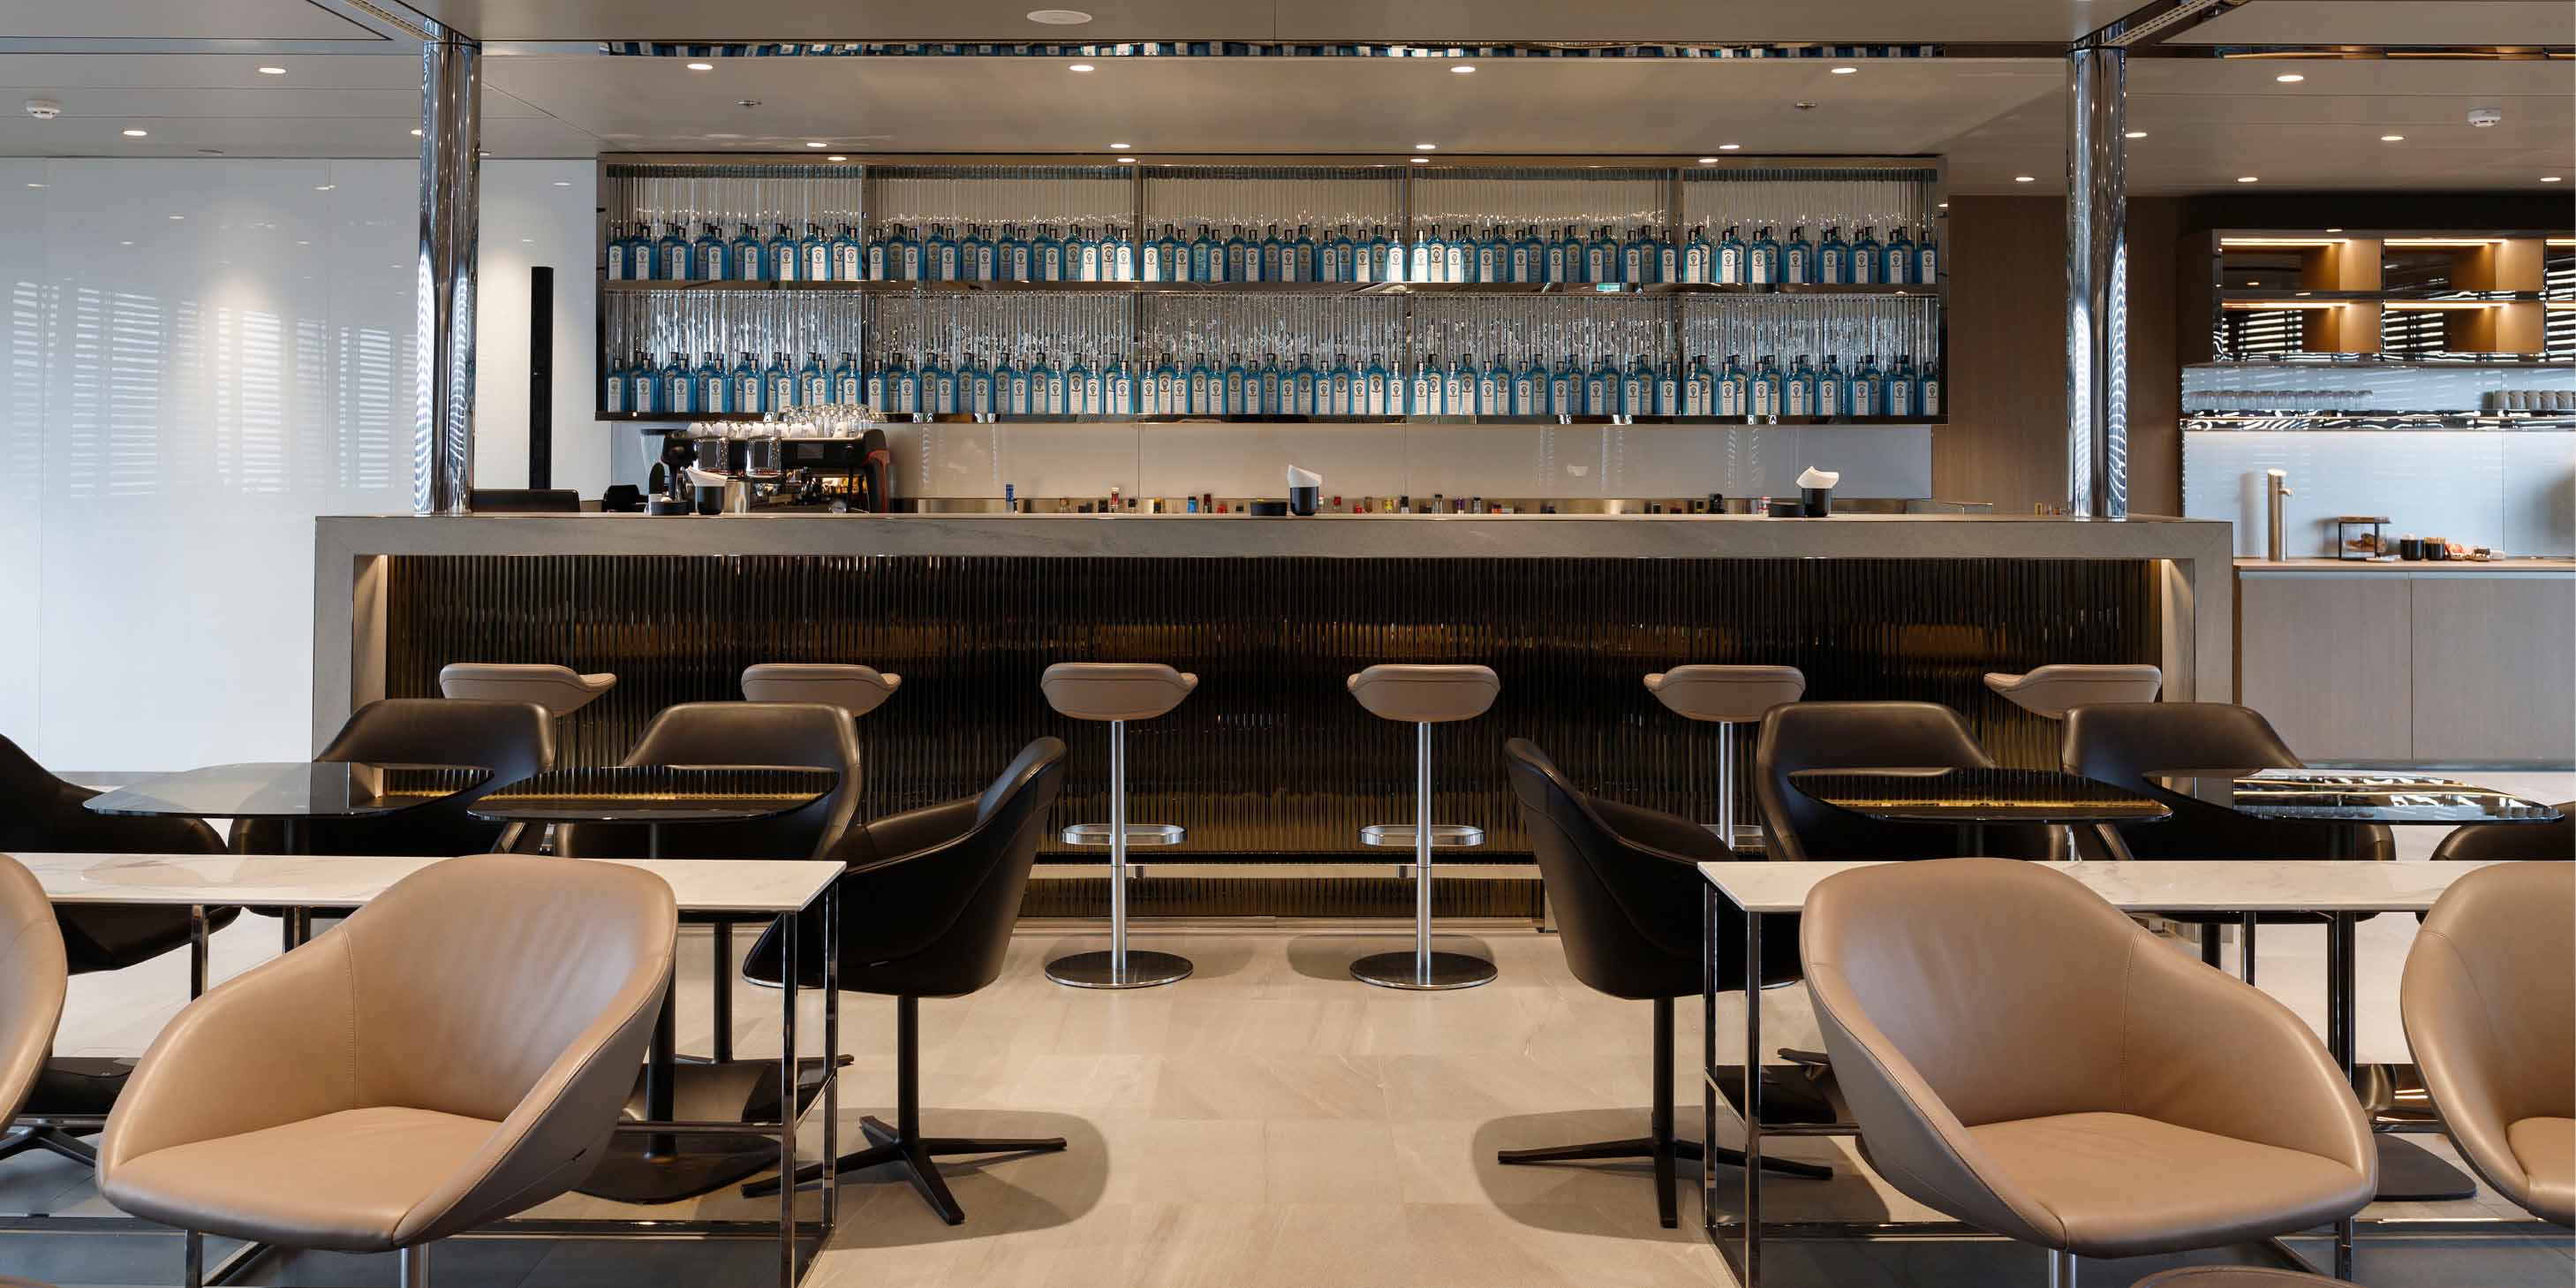 A well-stocked bar with rows of bottles and comfortable stools, with tables and additional seating in the foreground 